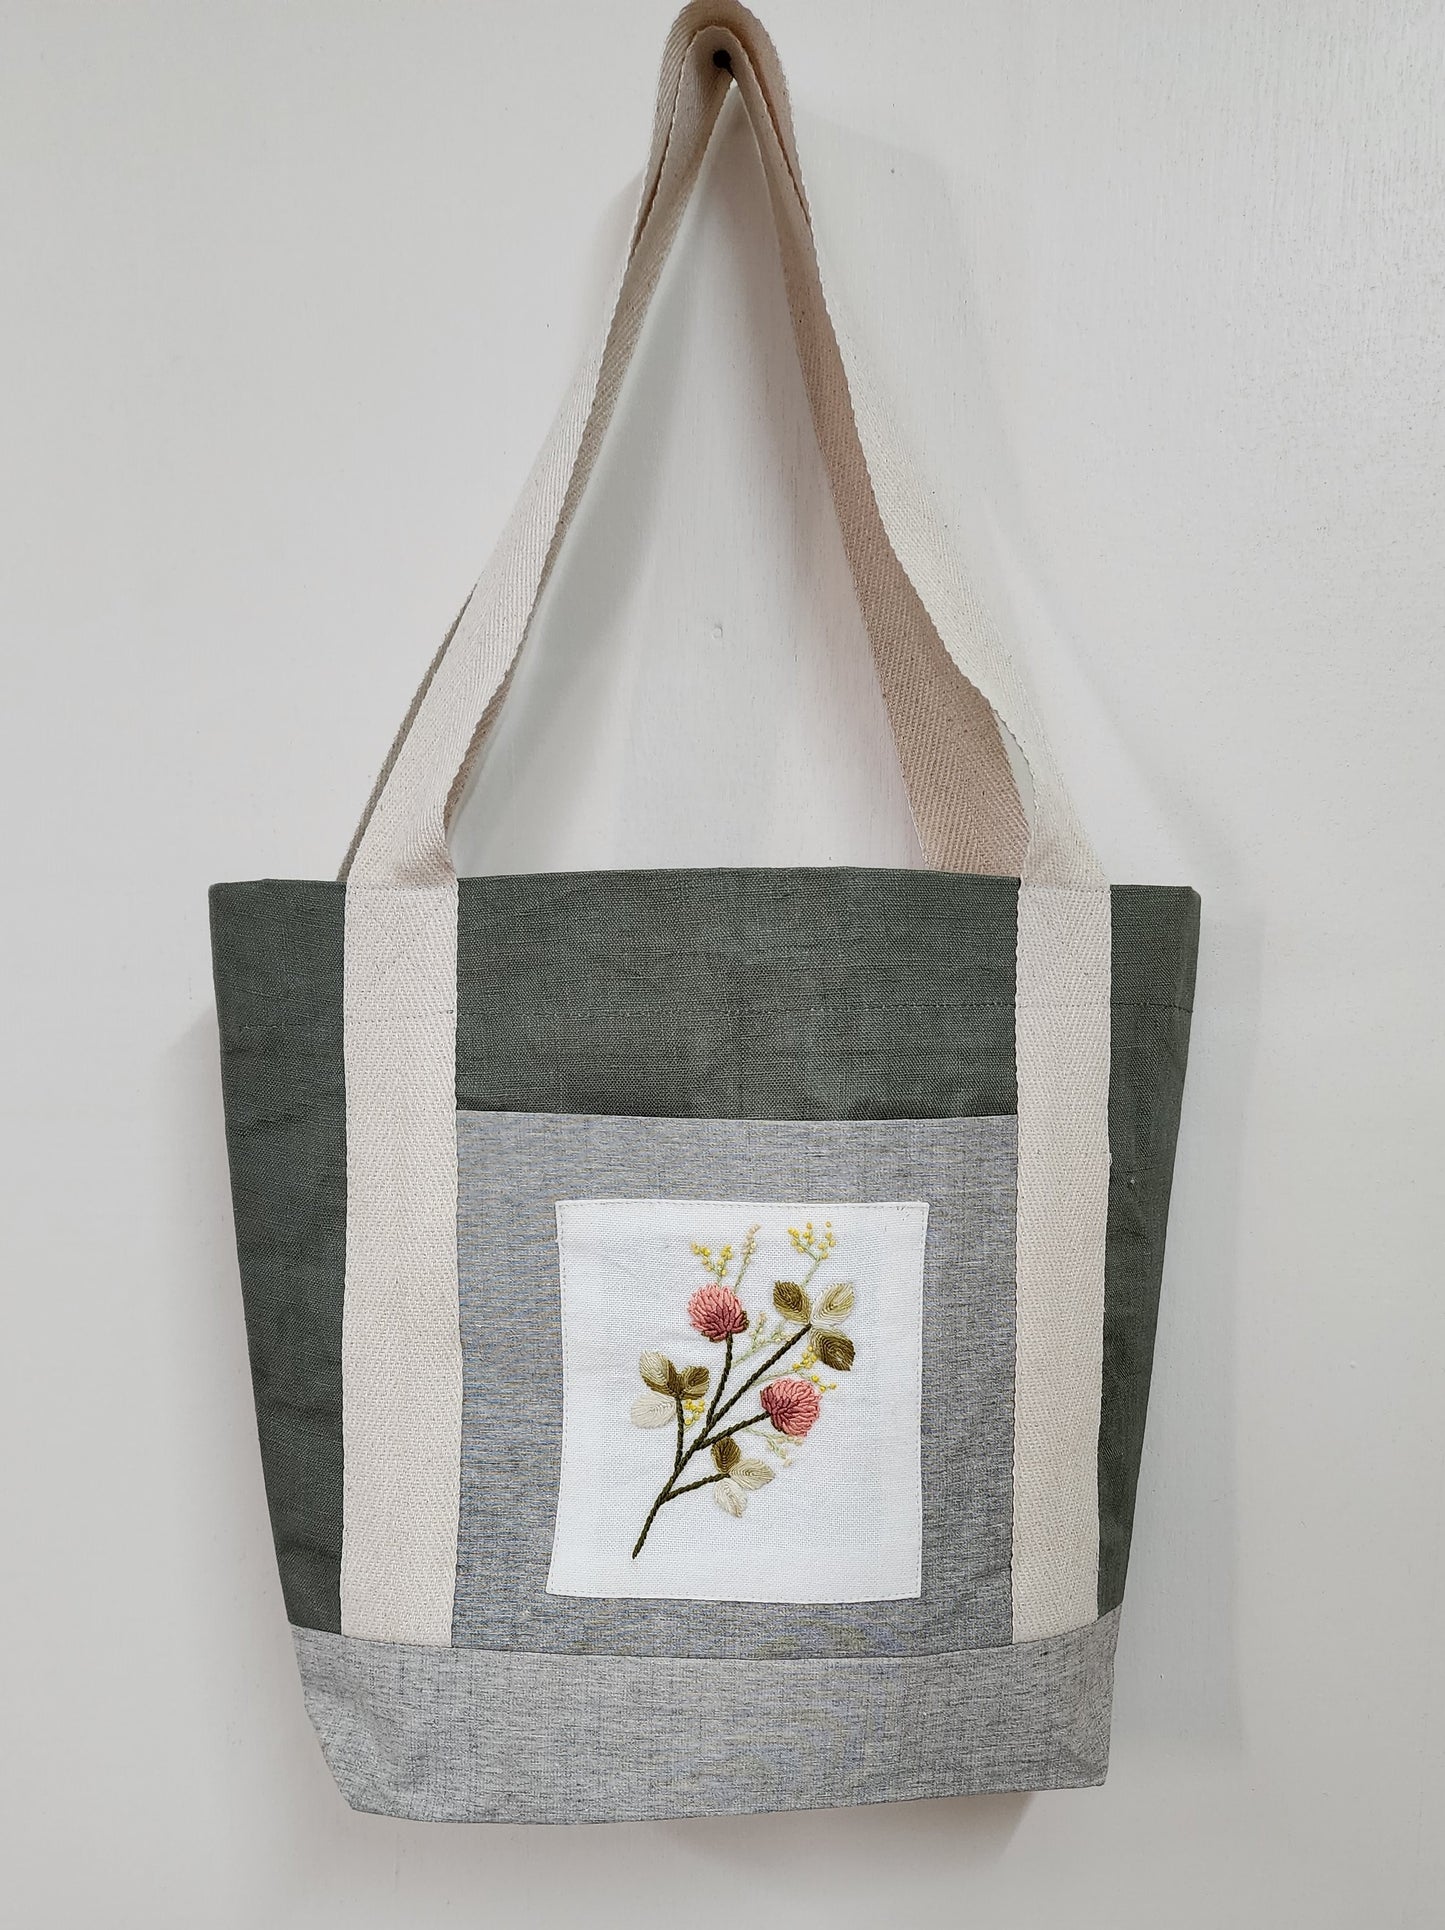 Ikali - Peach Clover -  Hand-embroidered Tote